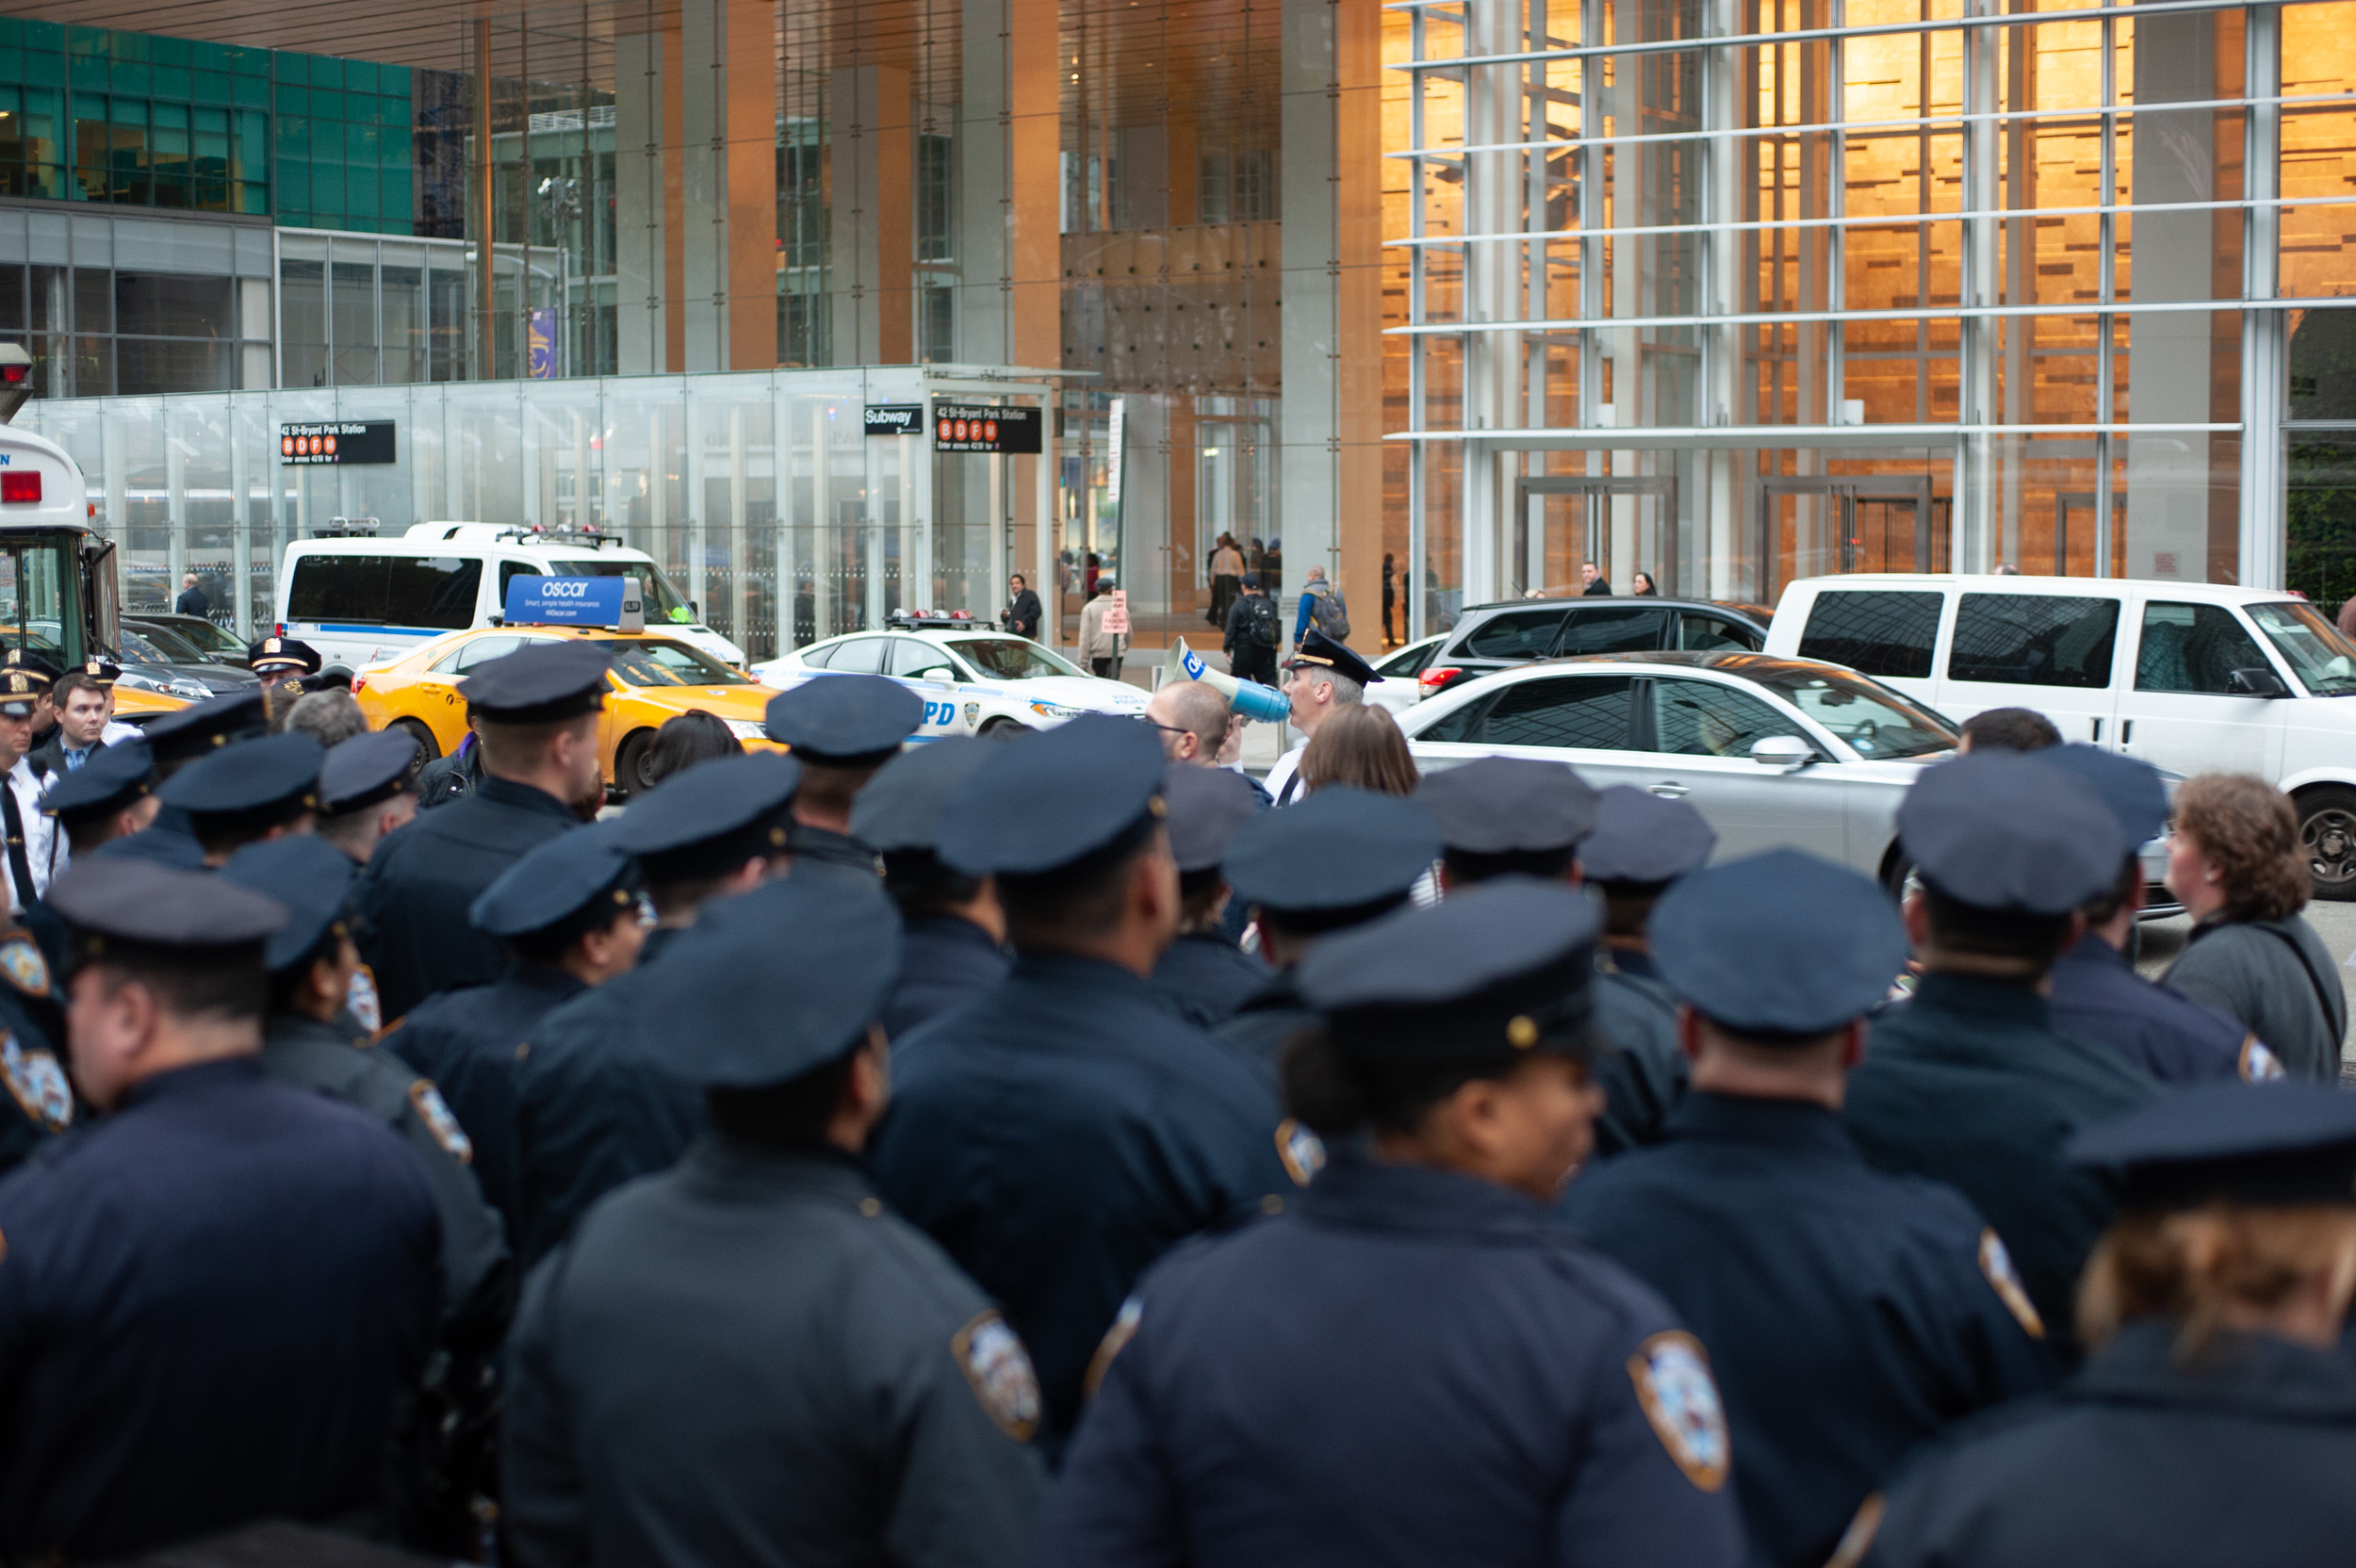 MULTIPLE COPS IN NEW YORK CITY ATTEND A MEETING ON THE STREETS OF MANHATTAN